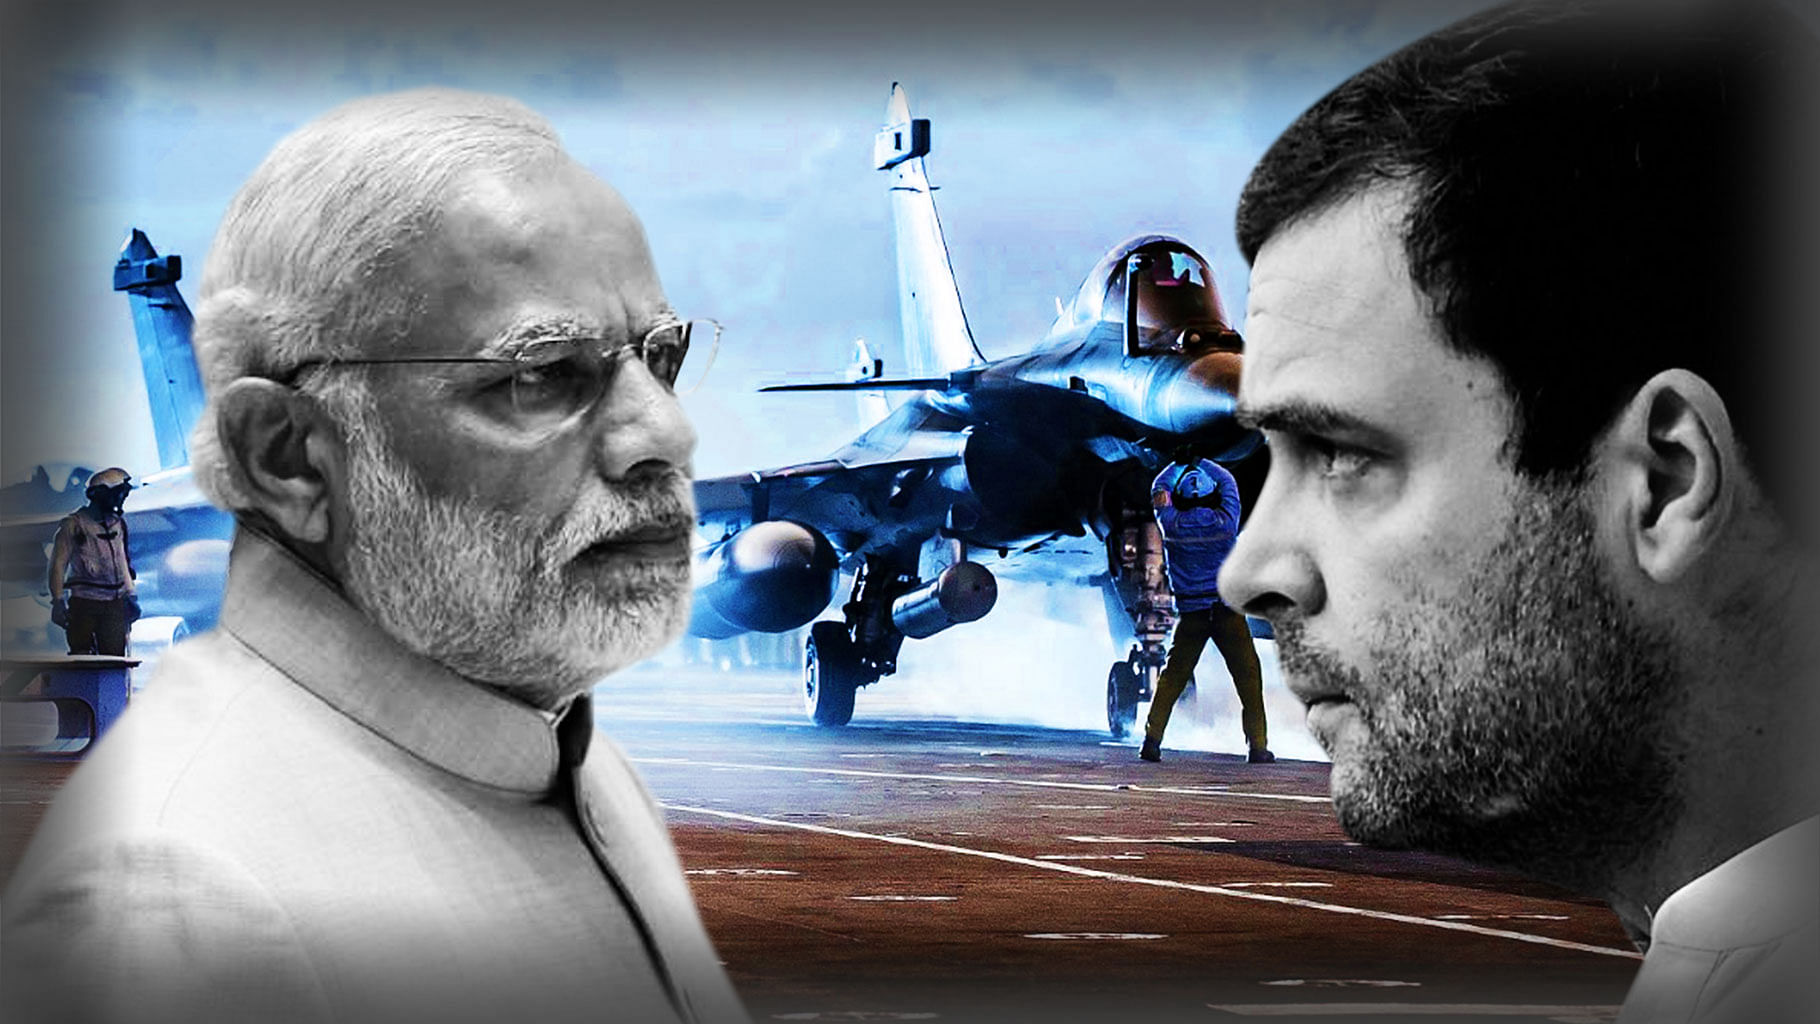 Congress President Rahul Gandhi vows to probe Rafale deal if voted to power.